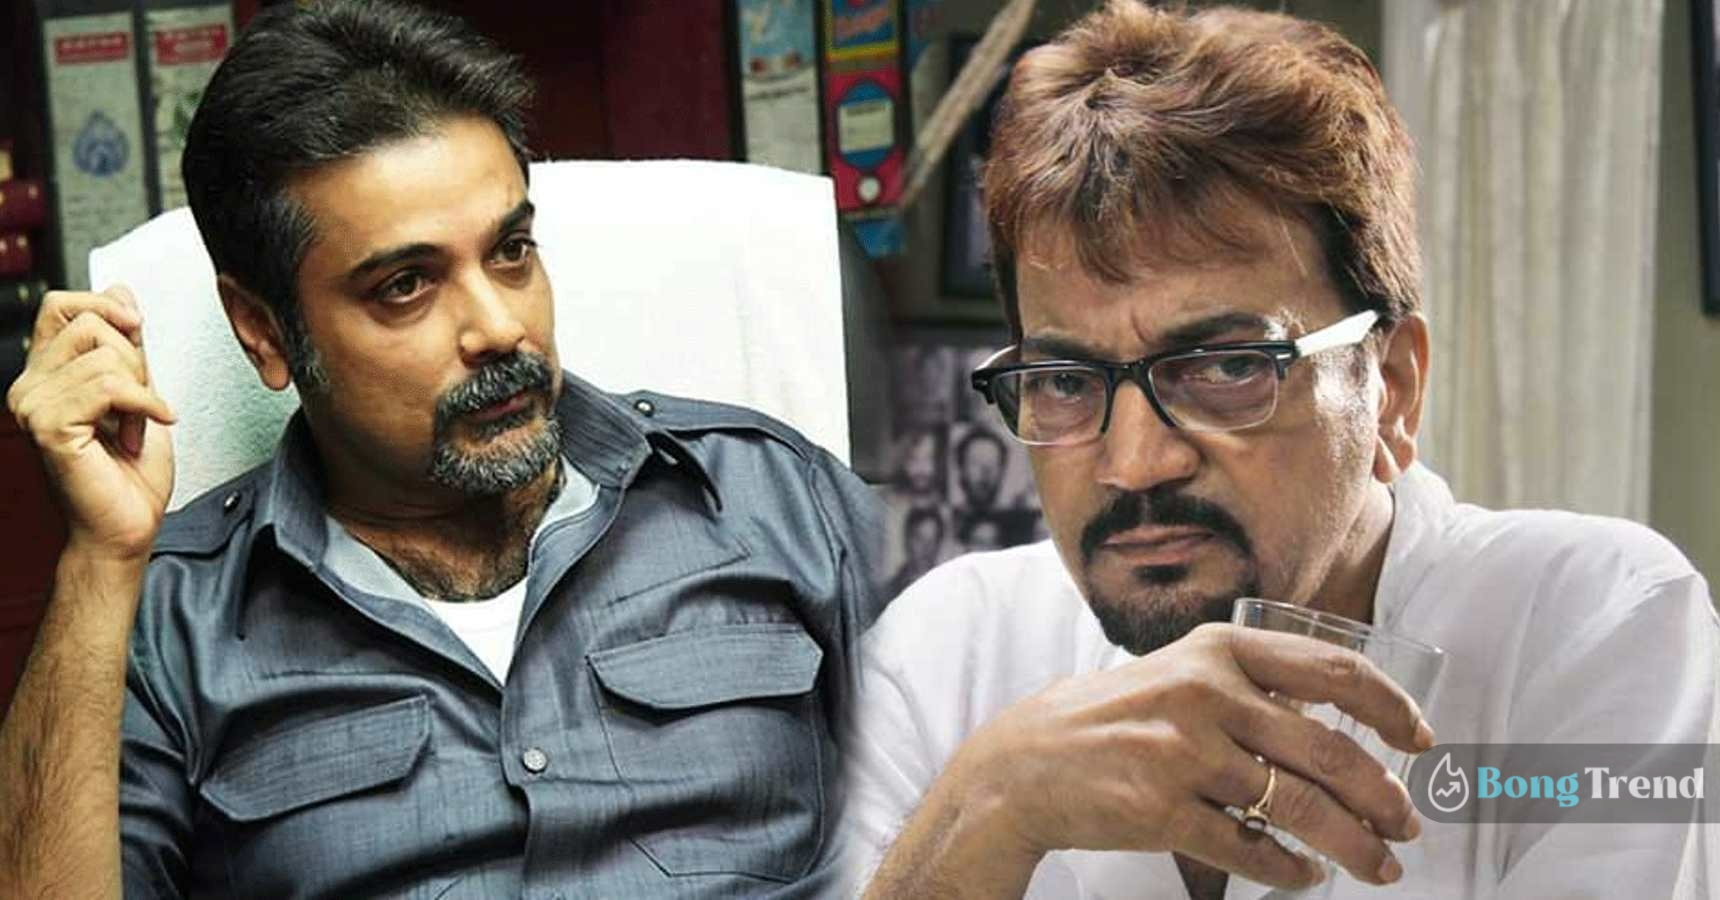 Chiranjeet once opened up about Prosenjit in talk show